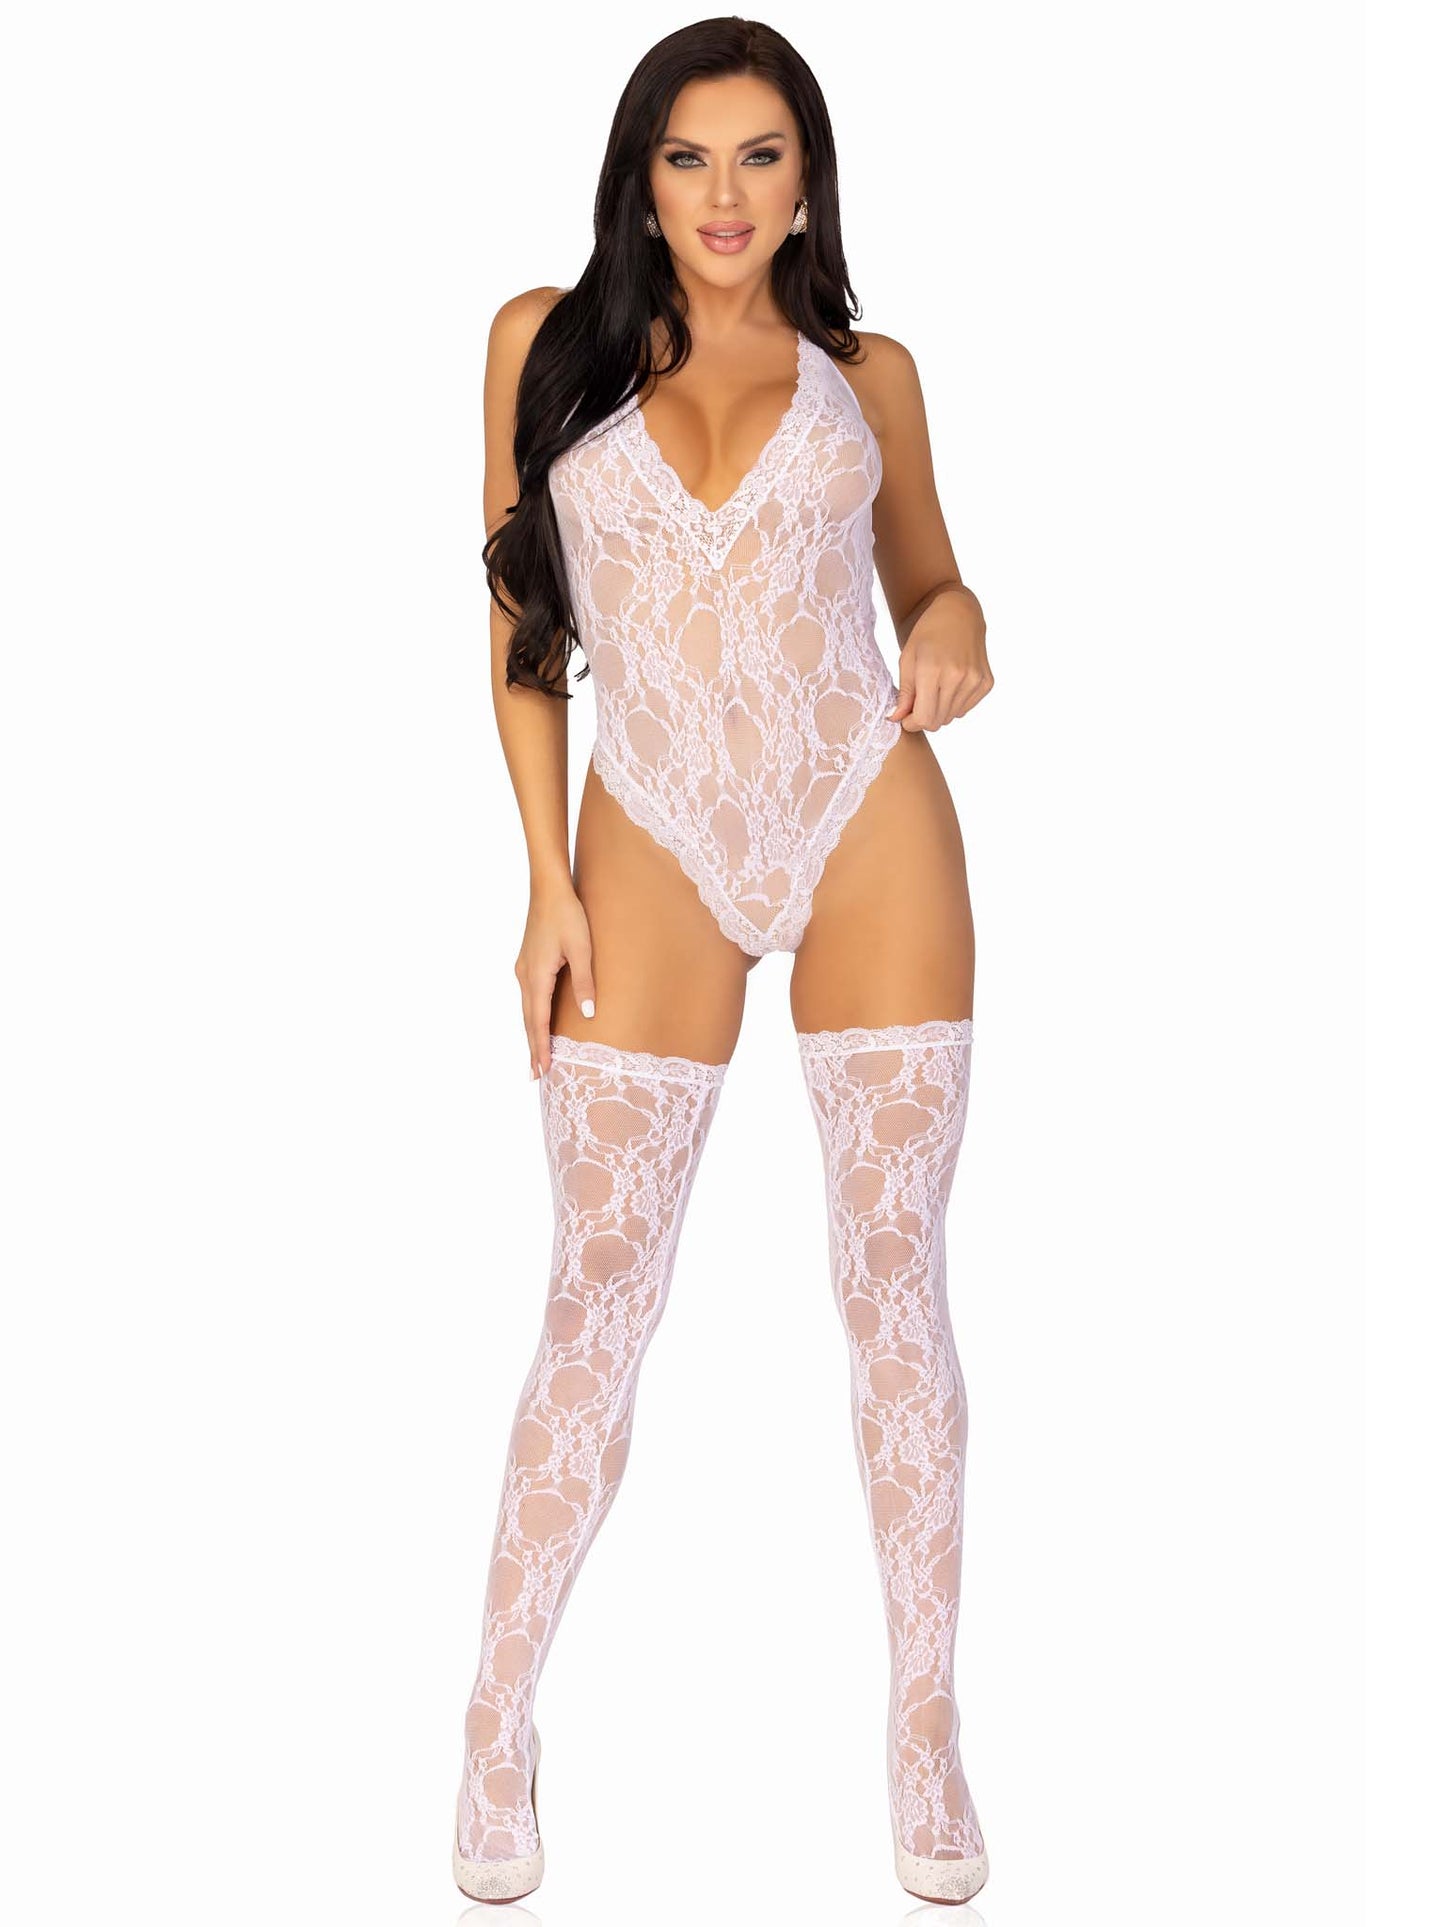 81484 - 2 Pc Floral Lace Deep-V Teddy And Matching Stockings.